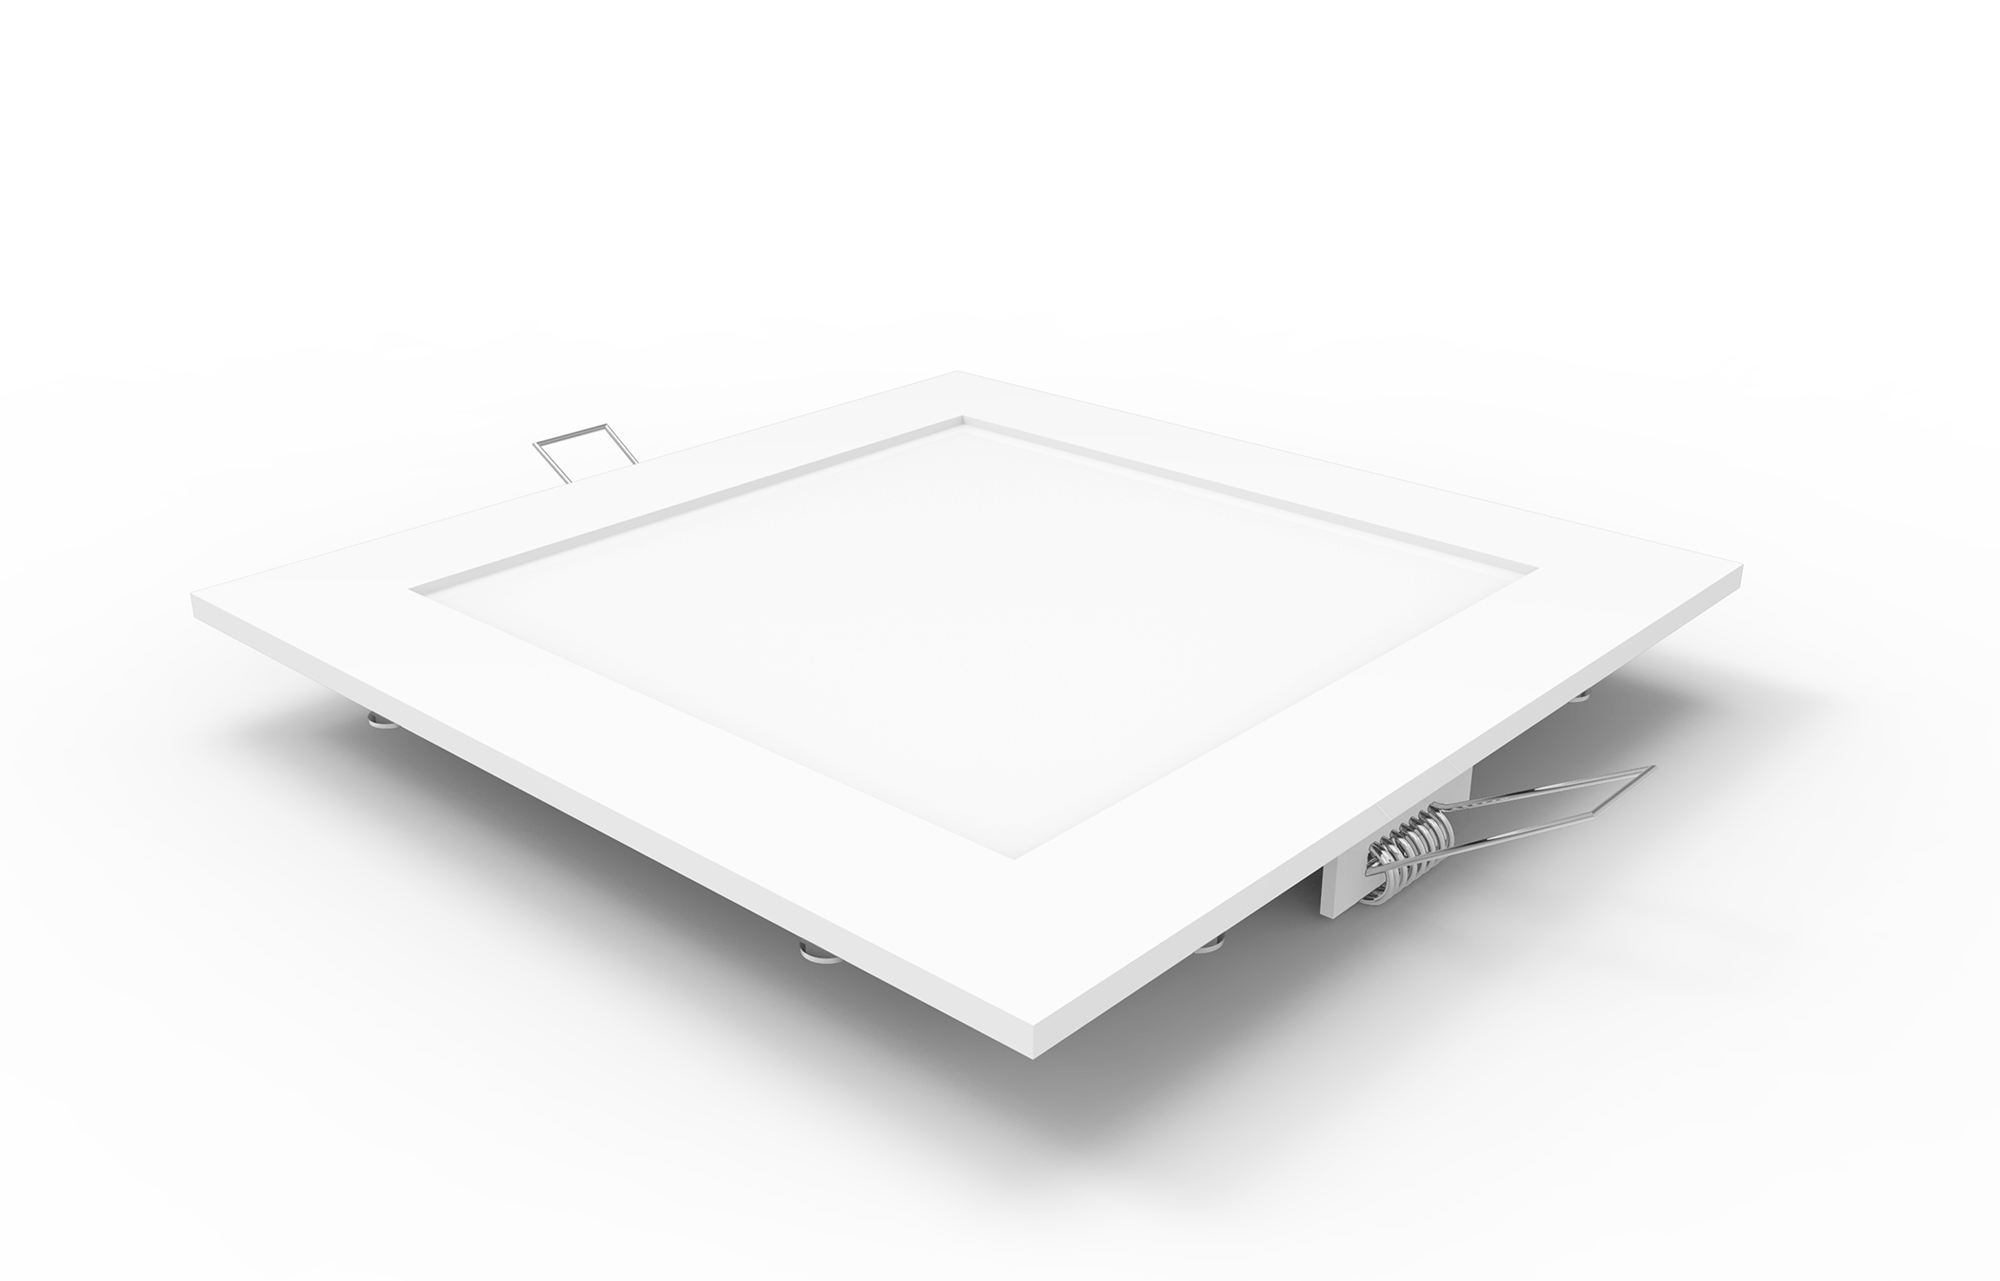 2010730010  Intego R Ecovision Slim Recessed 170mm Square (6") 12W, 6400K, 120°, Cut-Out 150x150mm